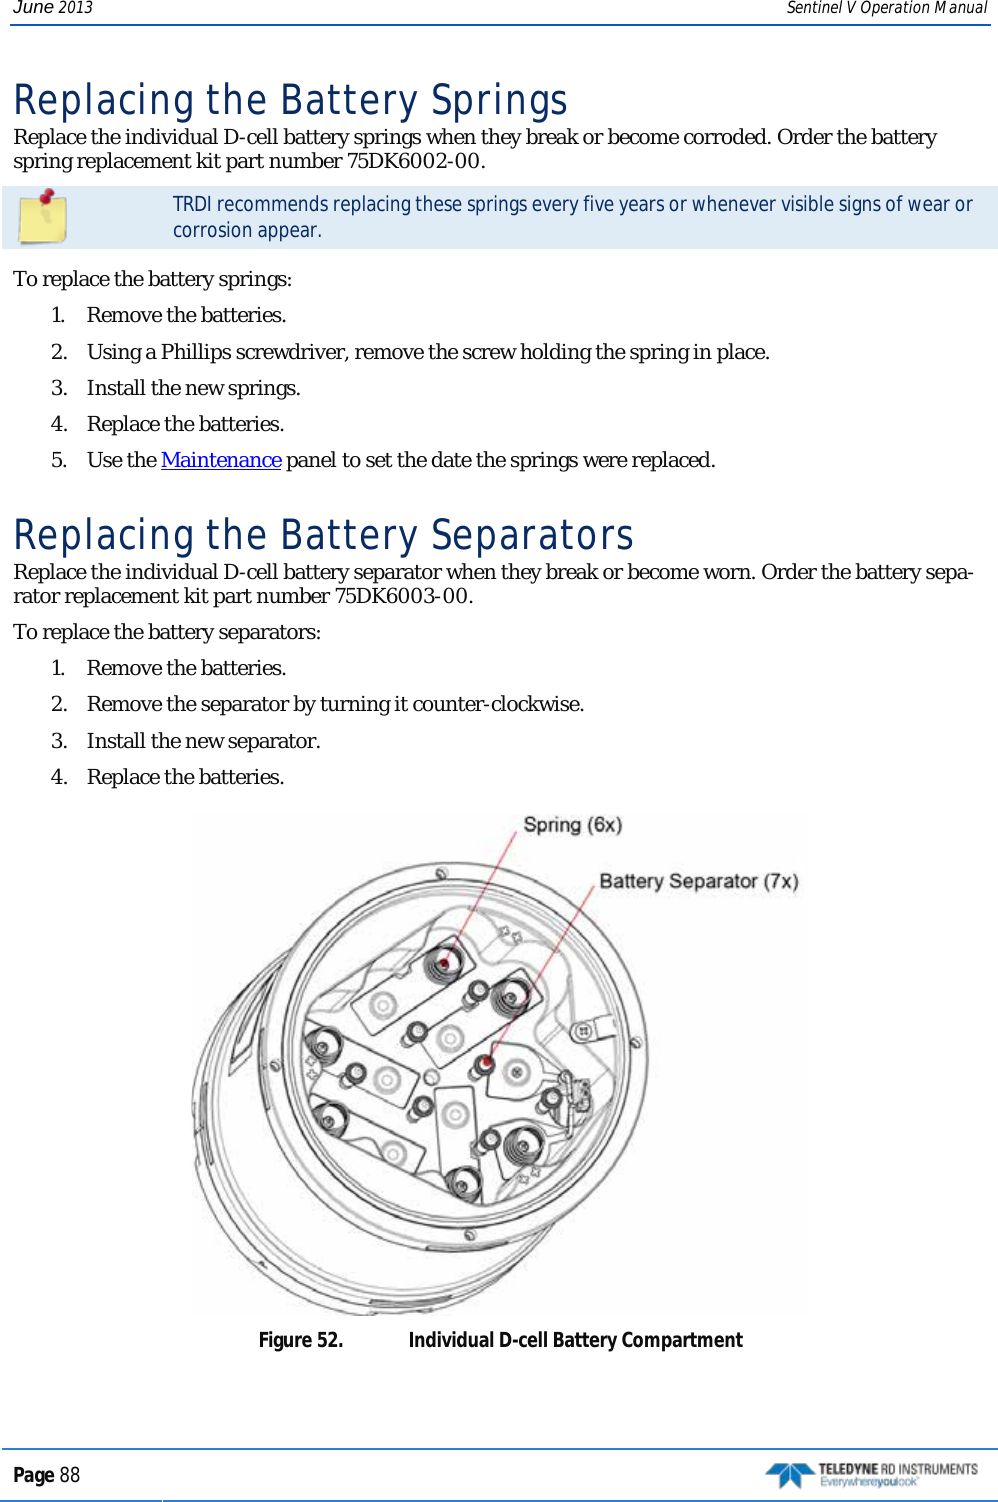 June 2013 Sentinel V Operation Manual Replacing the Battery Springs  Replace the individual D-cell battery springs when they break or become corroded. Order the battery spring replacement kit part number 75DK6002-00.   TRDI recommends replacing these springs every five years or whenever visible signs of wear or corrosion appear.  To replace the battery springs: 1.  Remove the batteries. 2.  Using a Phillips screwdriver, remove the screw holding the spring in place. 3.  Install the new springs. 4.  Replace the batteries.  5.  Use the Maintenance panel to set the date the springs were replaced.  Replacing the Battery Separators  Replace the individual D-cell battery separator when they break or become worn. Order the battery sepa-rator replacement kit part number 75DK6003-00.  To replace the battery separators: 1.  Remove the batteries. 2.  Remove the separator by turning it counter-clockwise. 3.  Install the new separator. 4.  Replace the batteries.   Figure 52.  Individual D-cell Battery Compartment  Page 88   